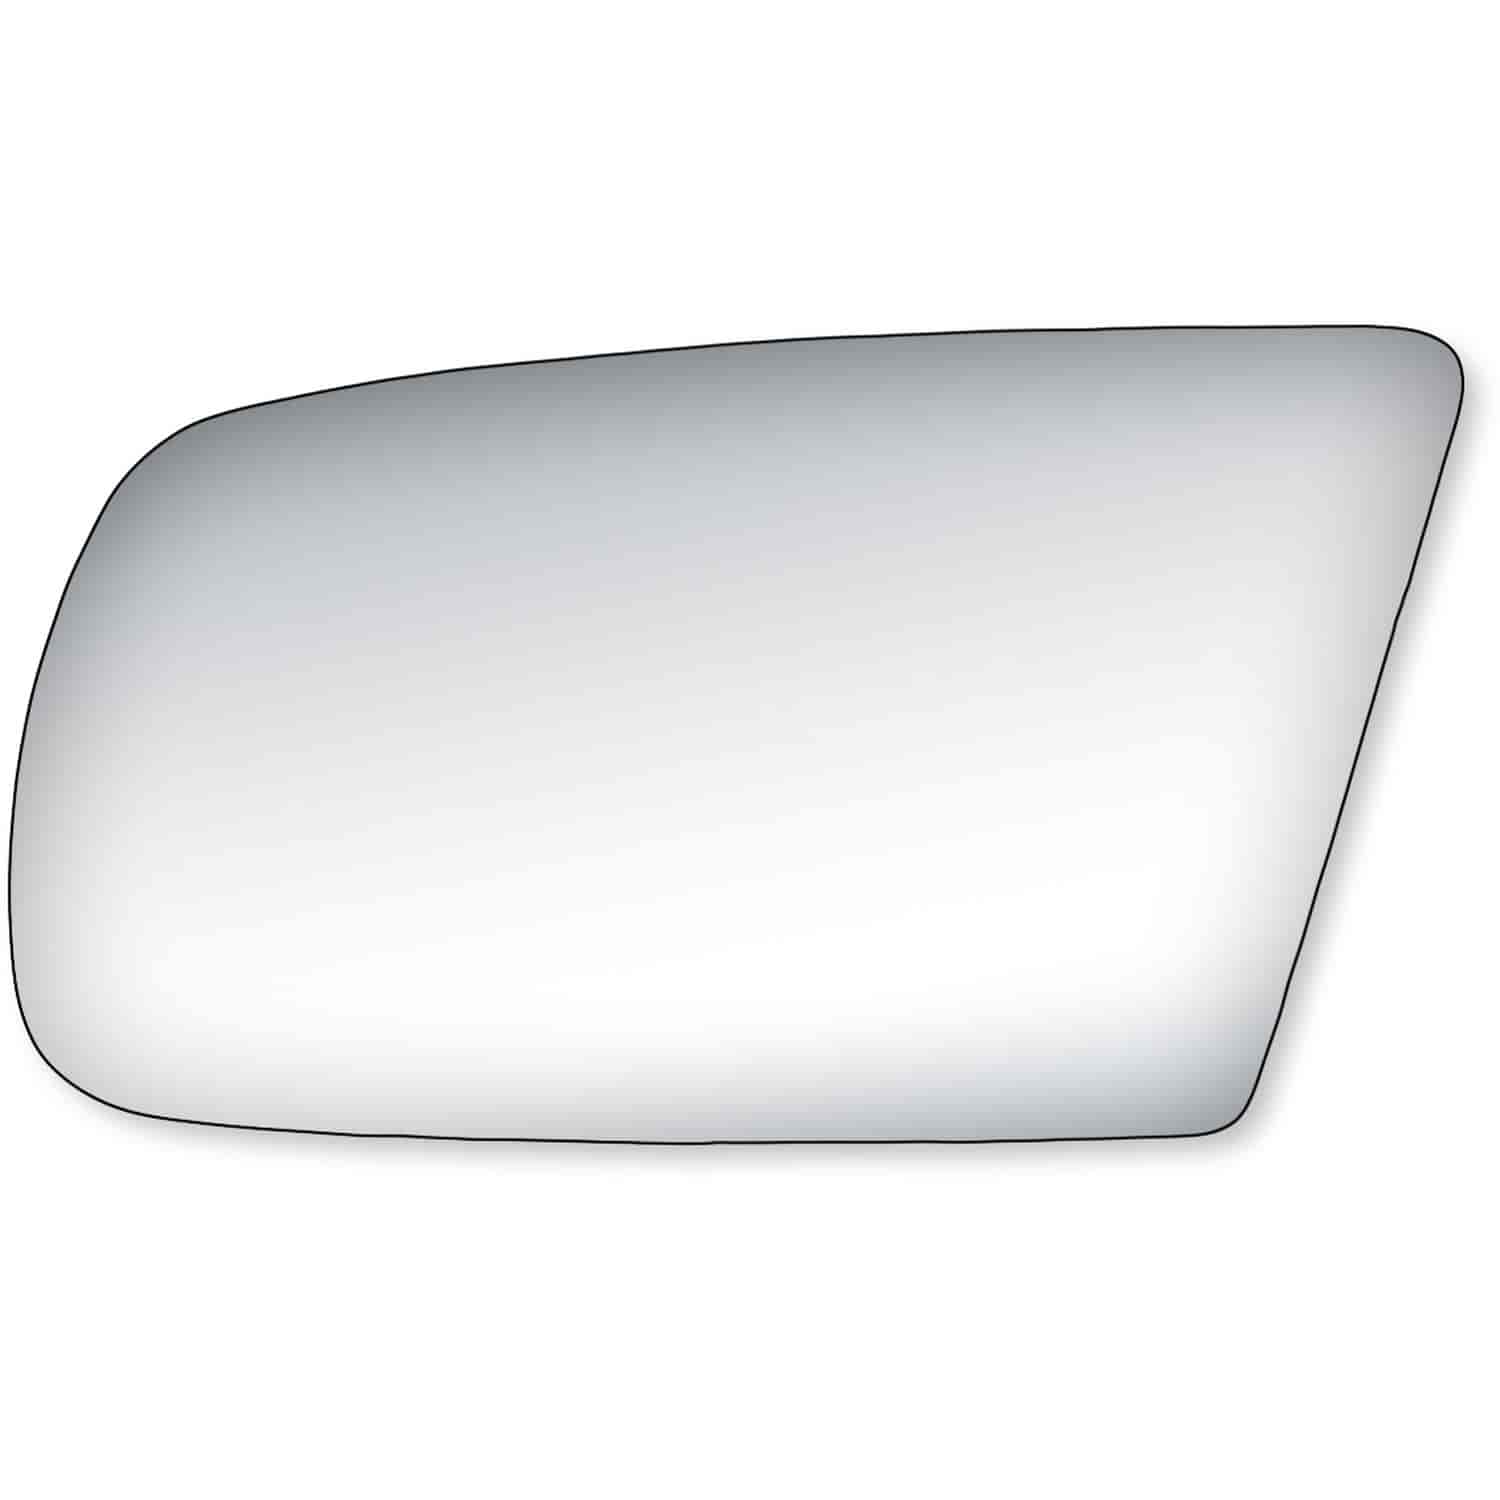 Replacement Glass for 88-96 Regal Coupe FWD ; 90-96 Regal Coupe ; 91-96 Regal Sedan 110 mm base ; 90